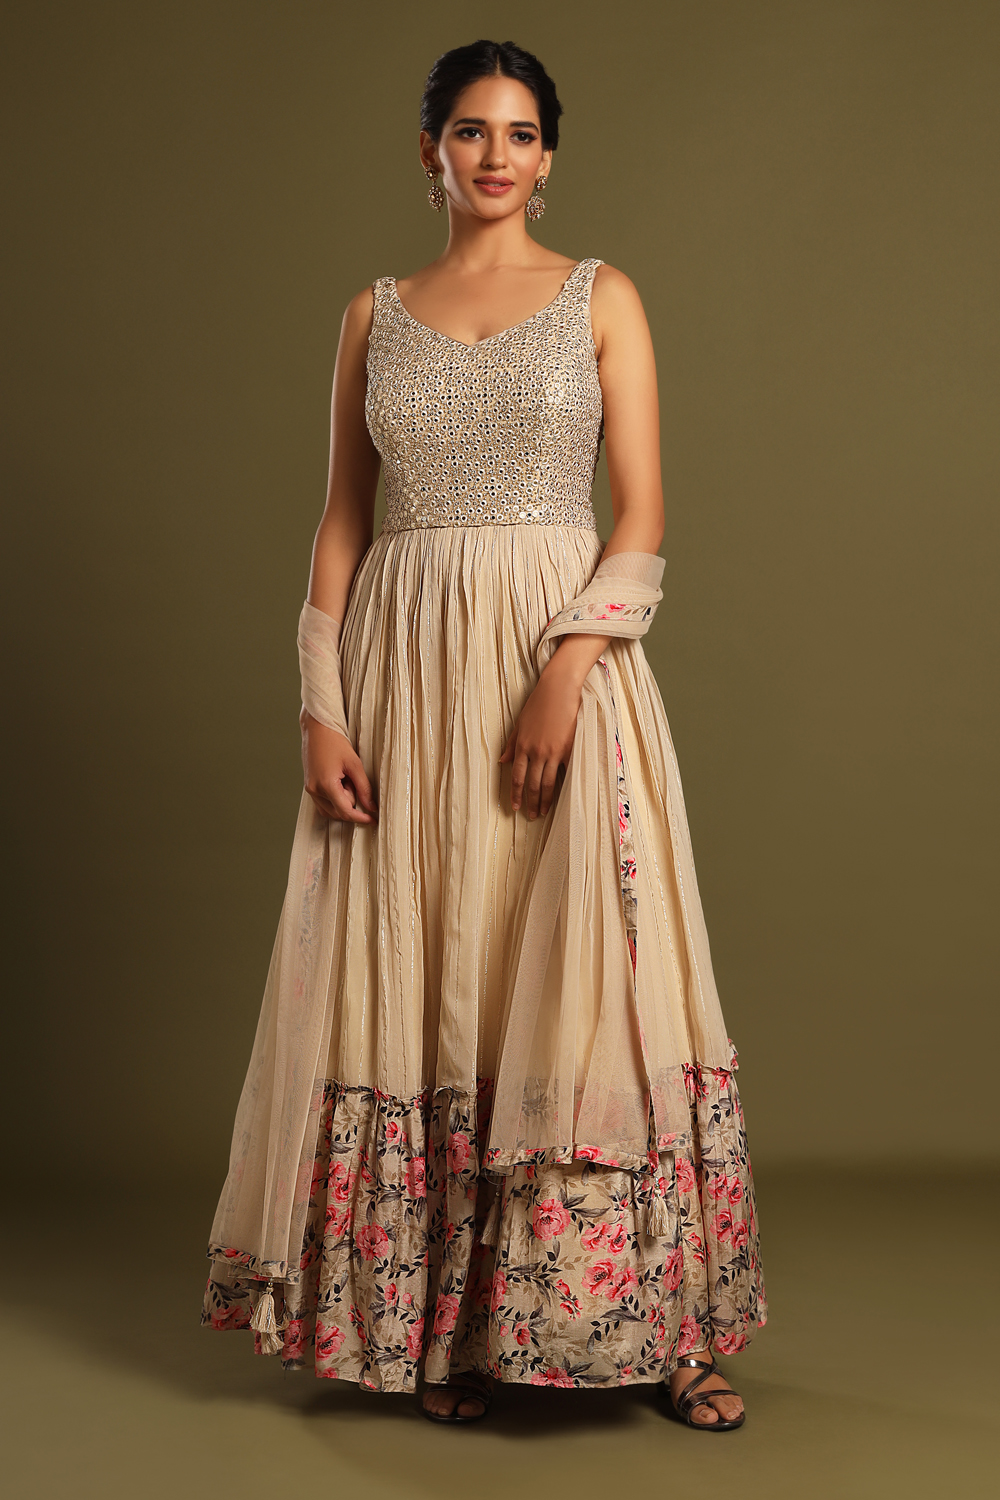 Dress with Puffed Sleeves, Cream-colored satin evening gown printed with  multicolored flowers. Model with head sleeves that are reinforced with  sewn-in band. The body is wrinkled in the center front at the